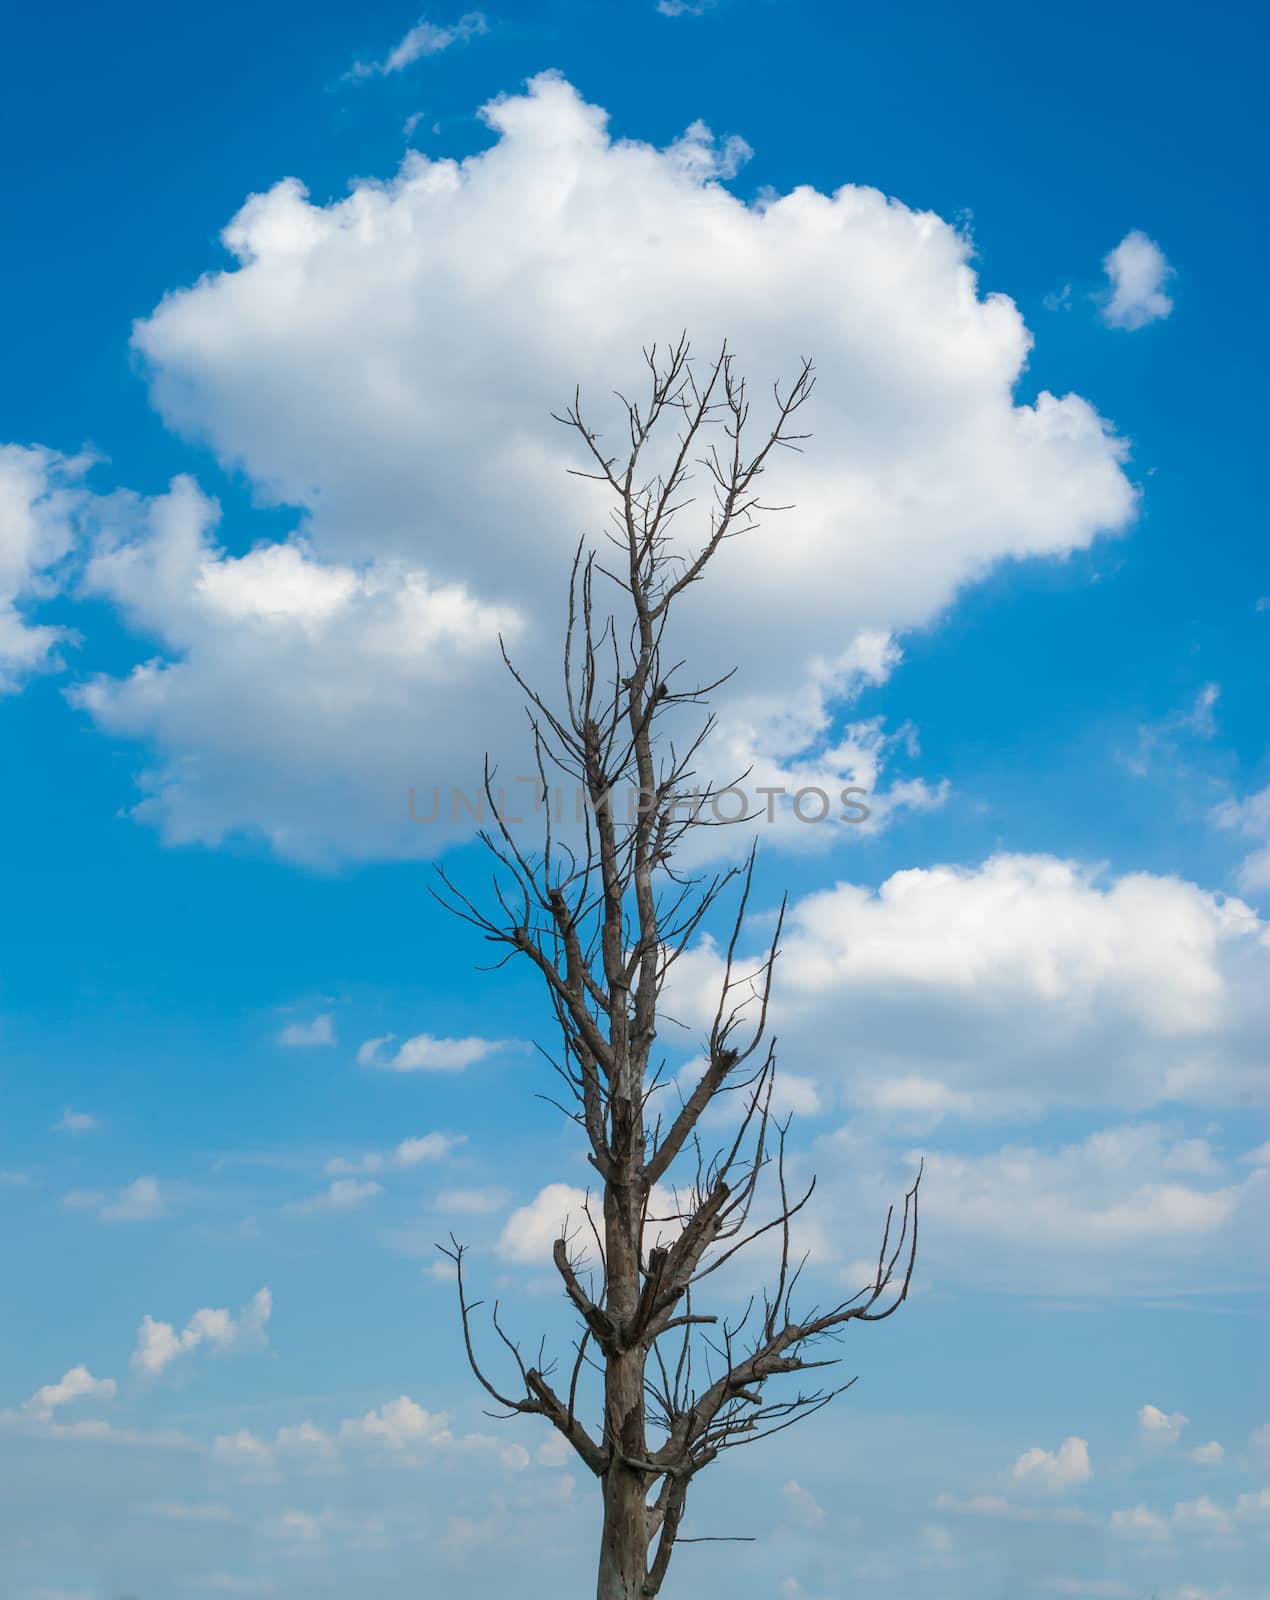 Dead tree with blue sky and cloud background